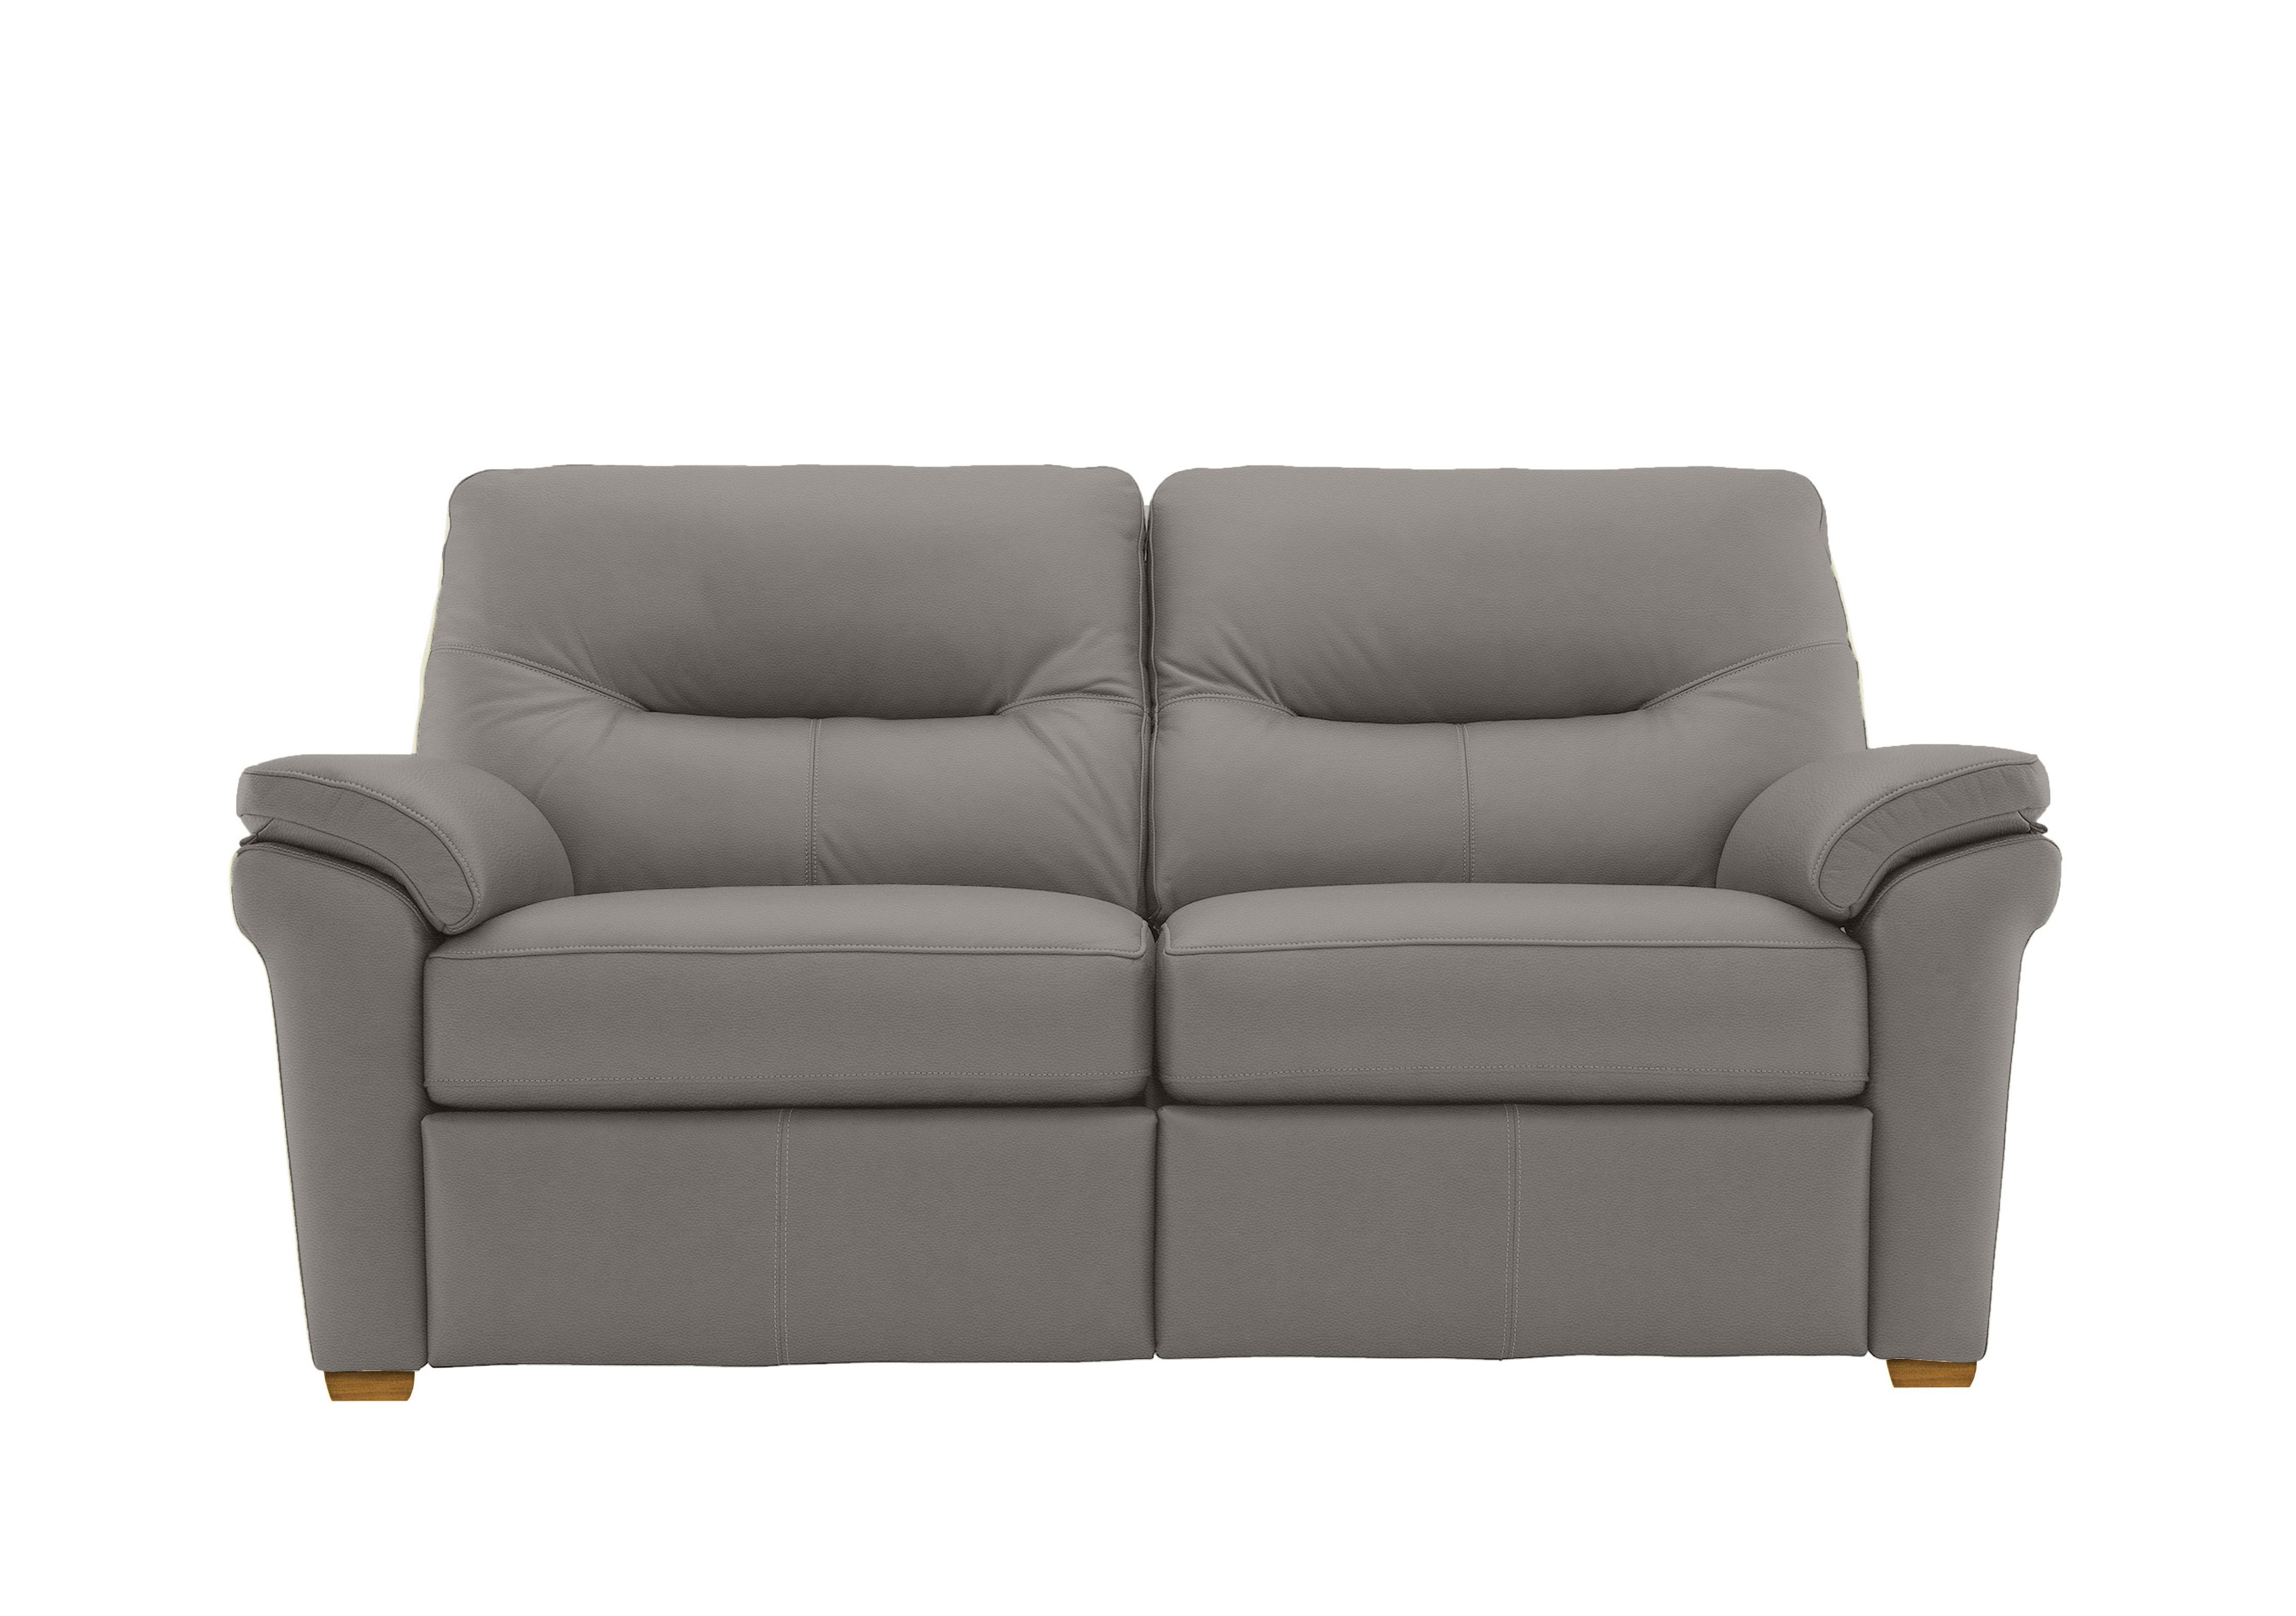 Seattle 2.5 Seater Leather Sofa with Wooden Feet in L842 Cambridge Grey Ok on Furniture Village